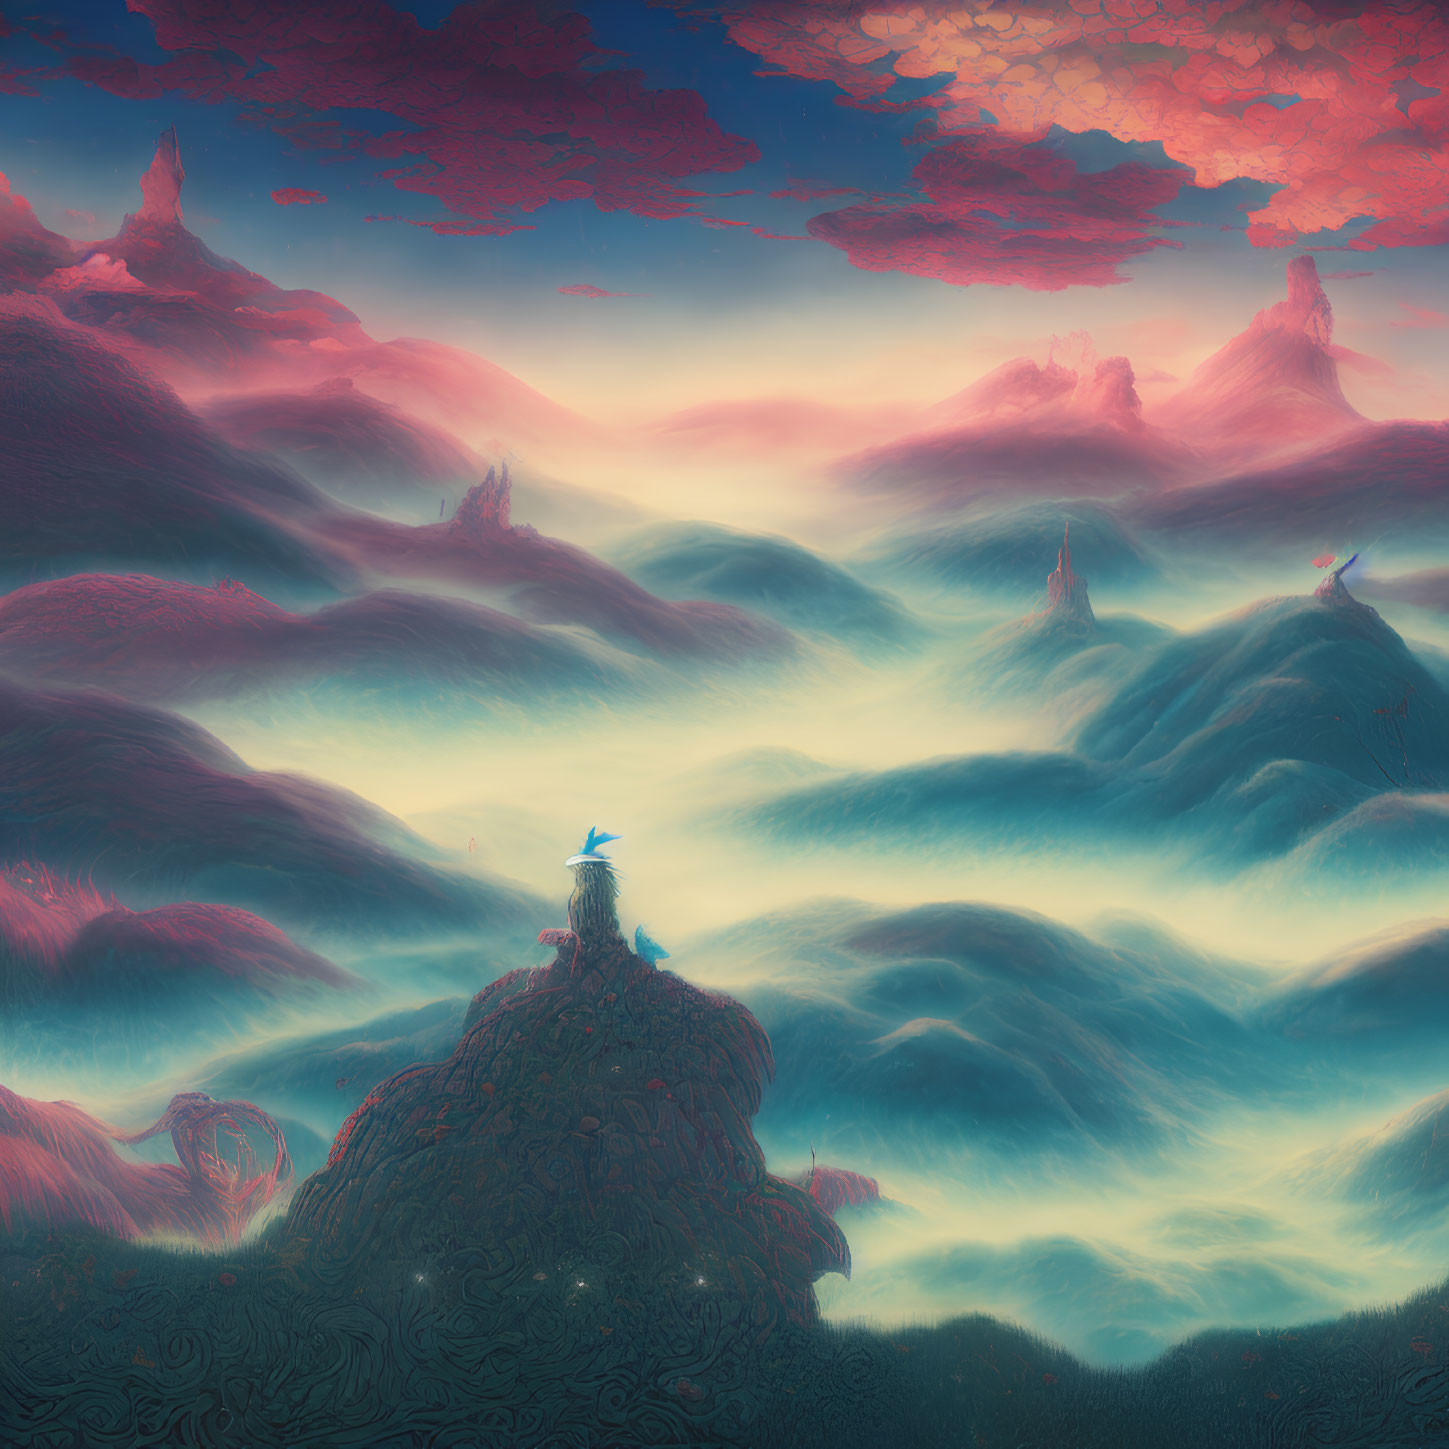 Surreal landscape with pink clouds and lone figure atop peak